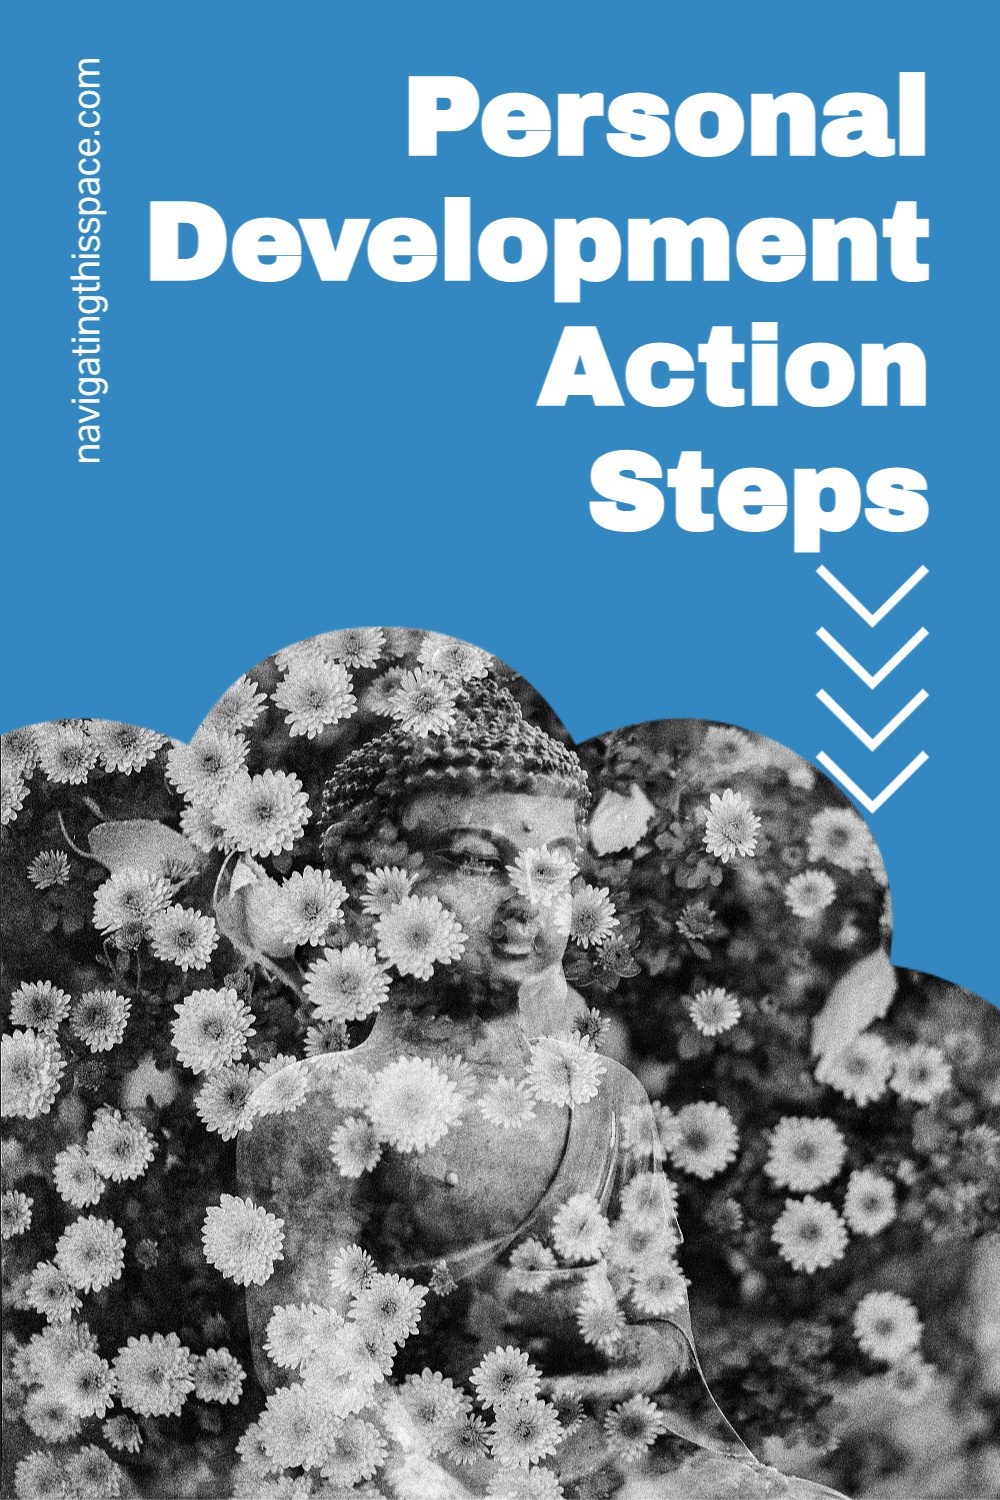 personal development action steps. Buddha's statue surrounded by falling flowers